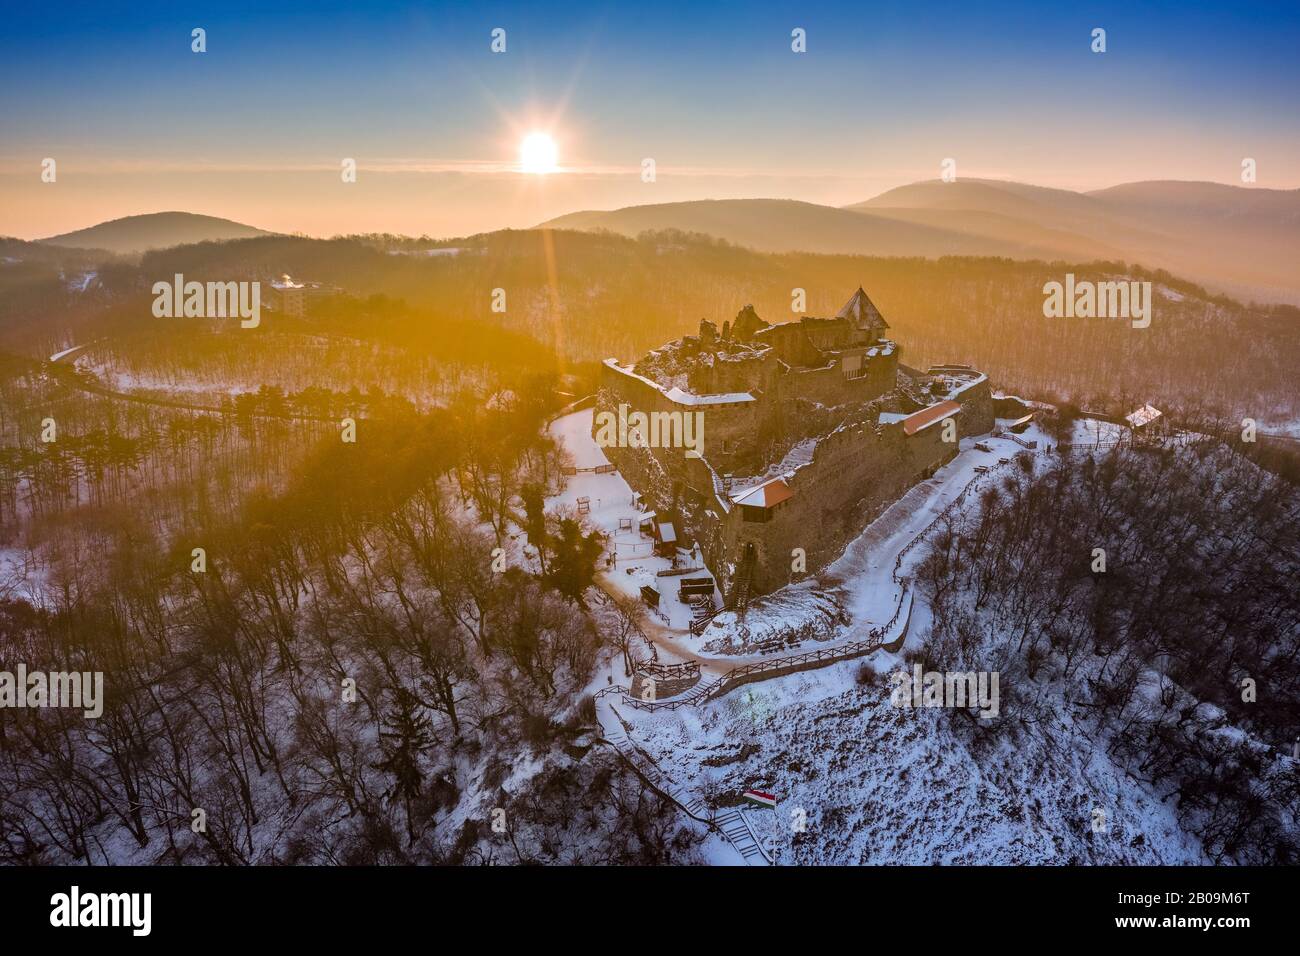 Visegrad, Hungary - Aerial view of the beautiful old high castle of Visegrad at sunrise on a winter morning with snow Stock Photo